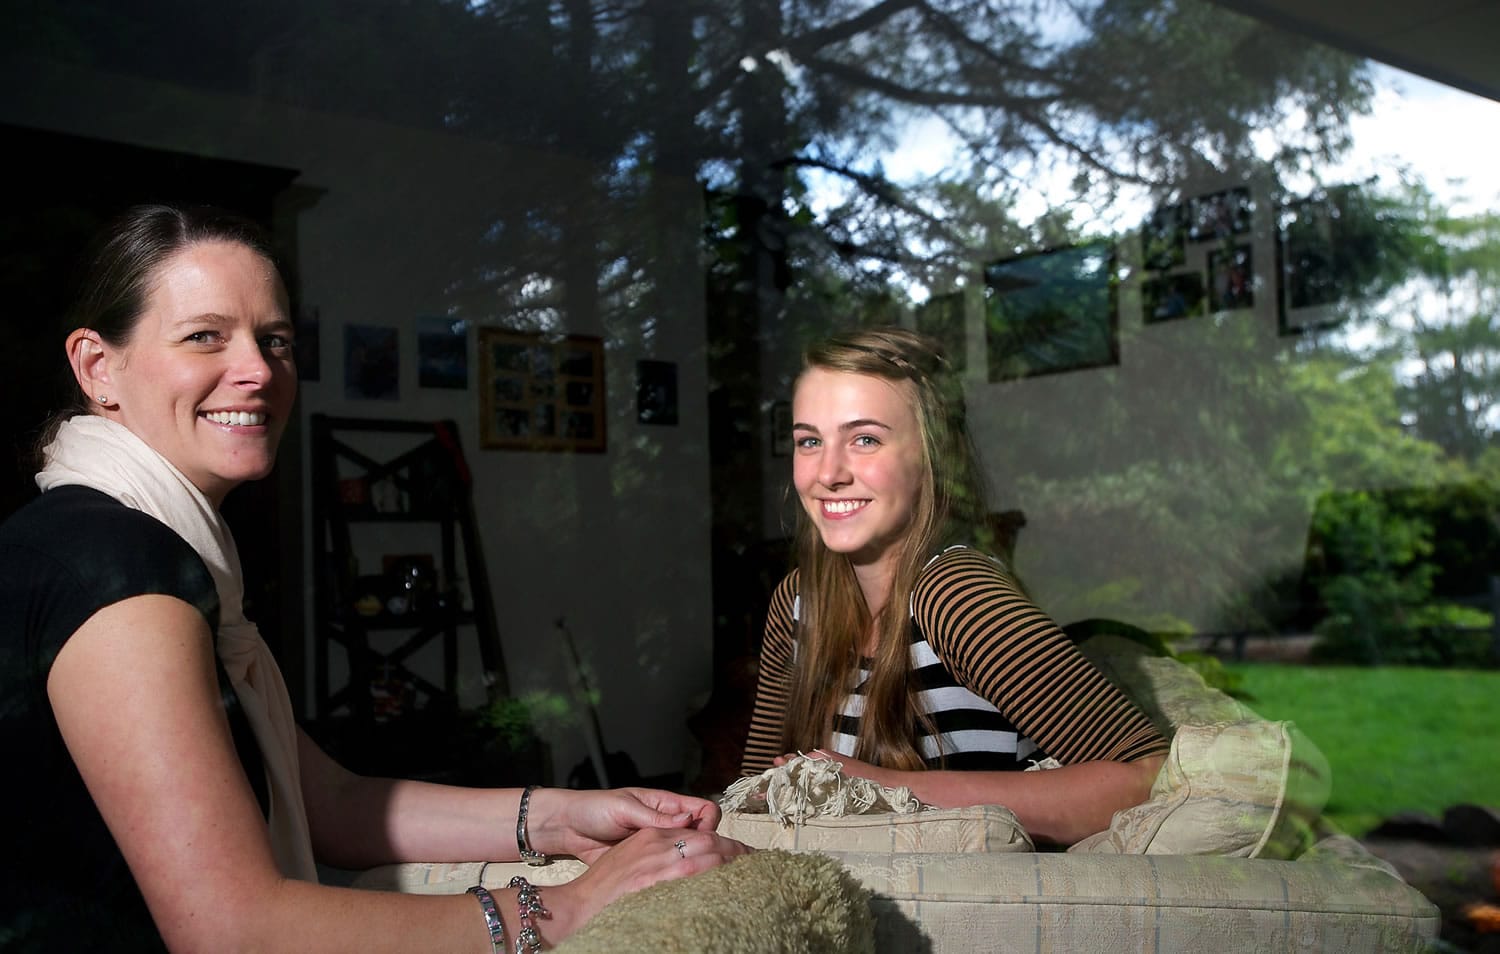 Brenda Gillas, and her daughter, Addie, 14, pose for a portrait at their Vancouver home. Brenda and Addie made the decision to have Addie immunized against human papillomavirus.